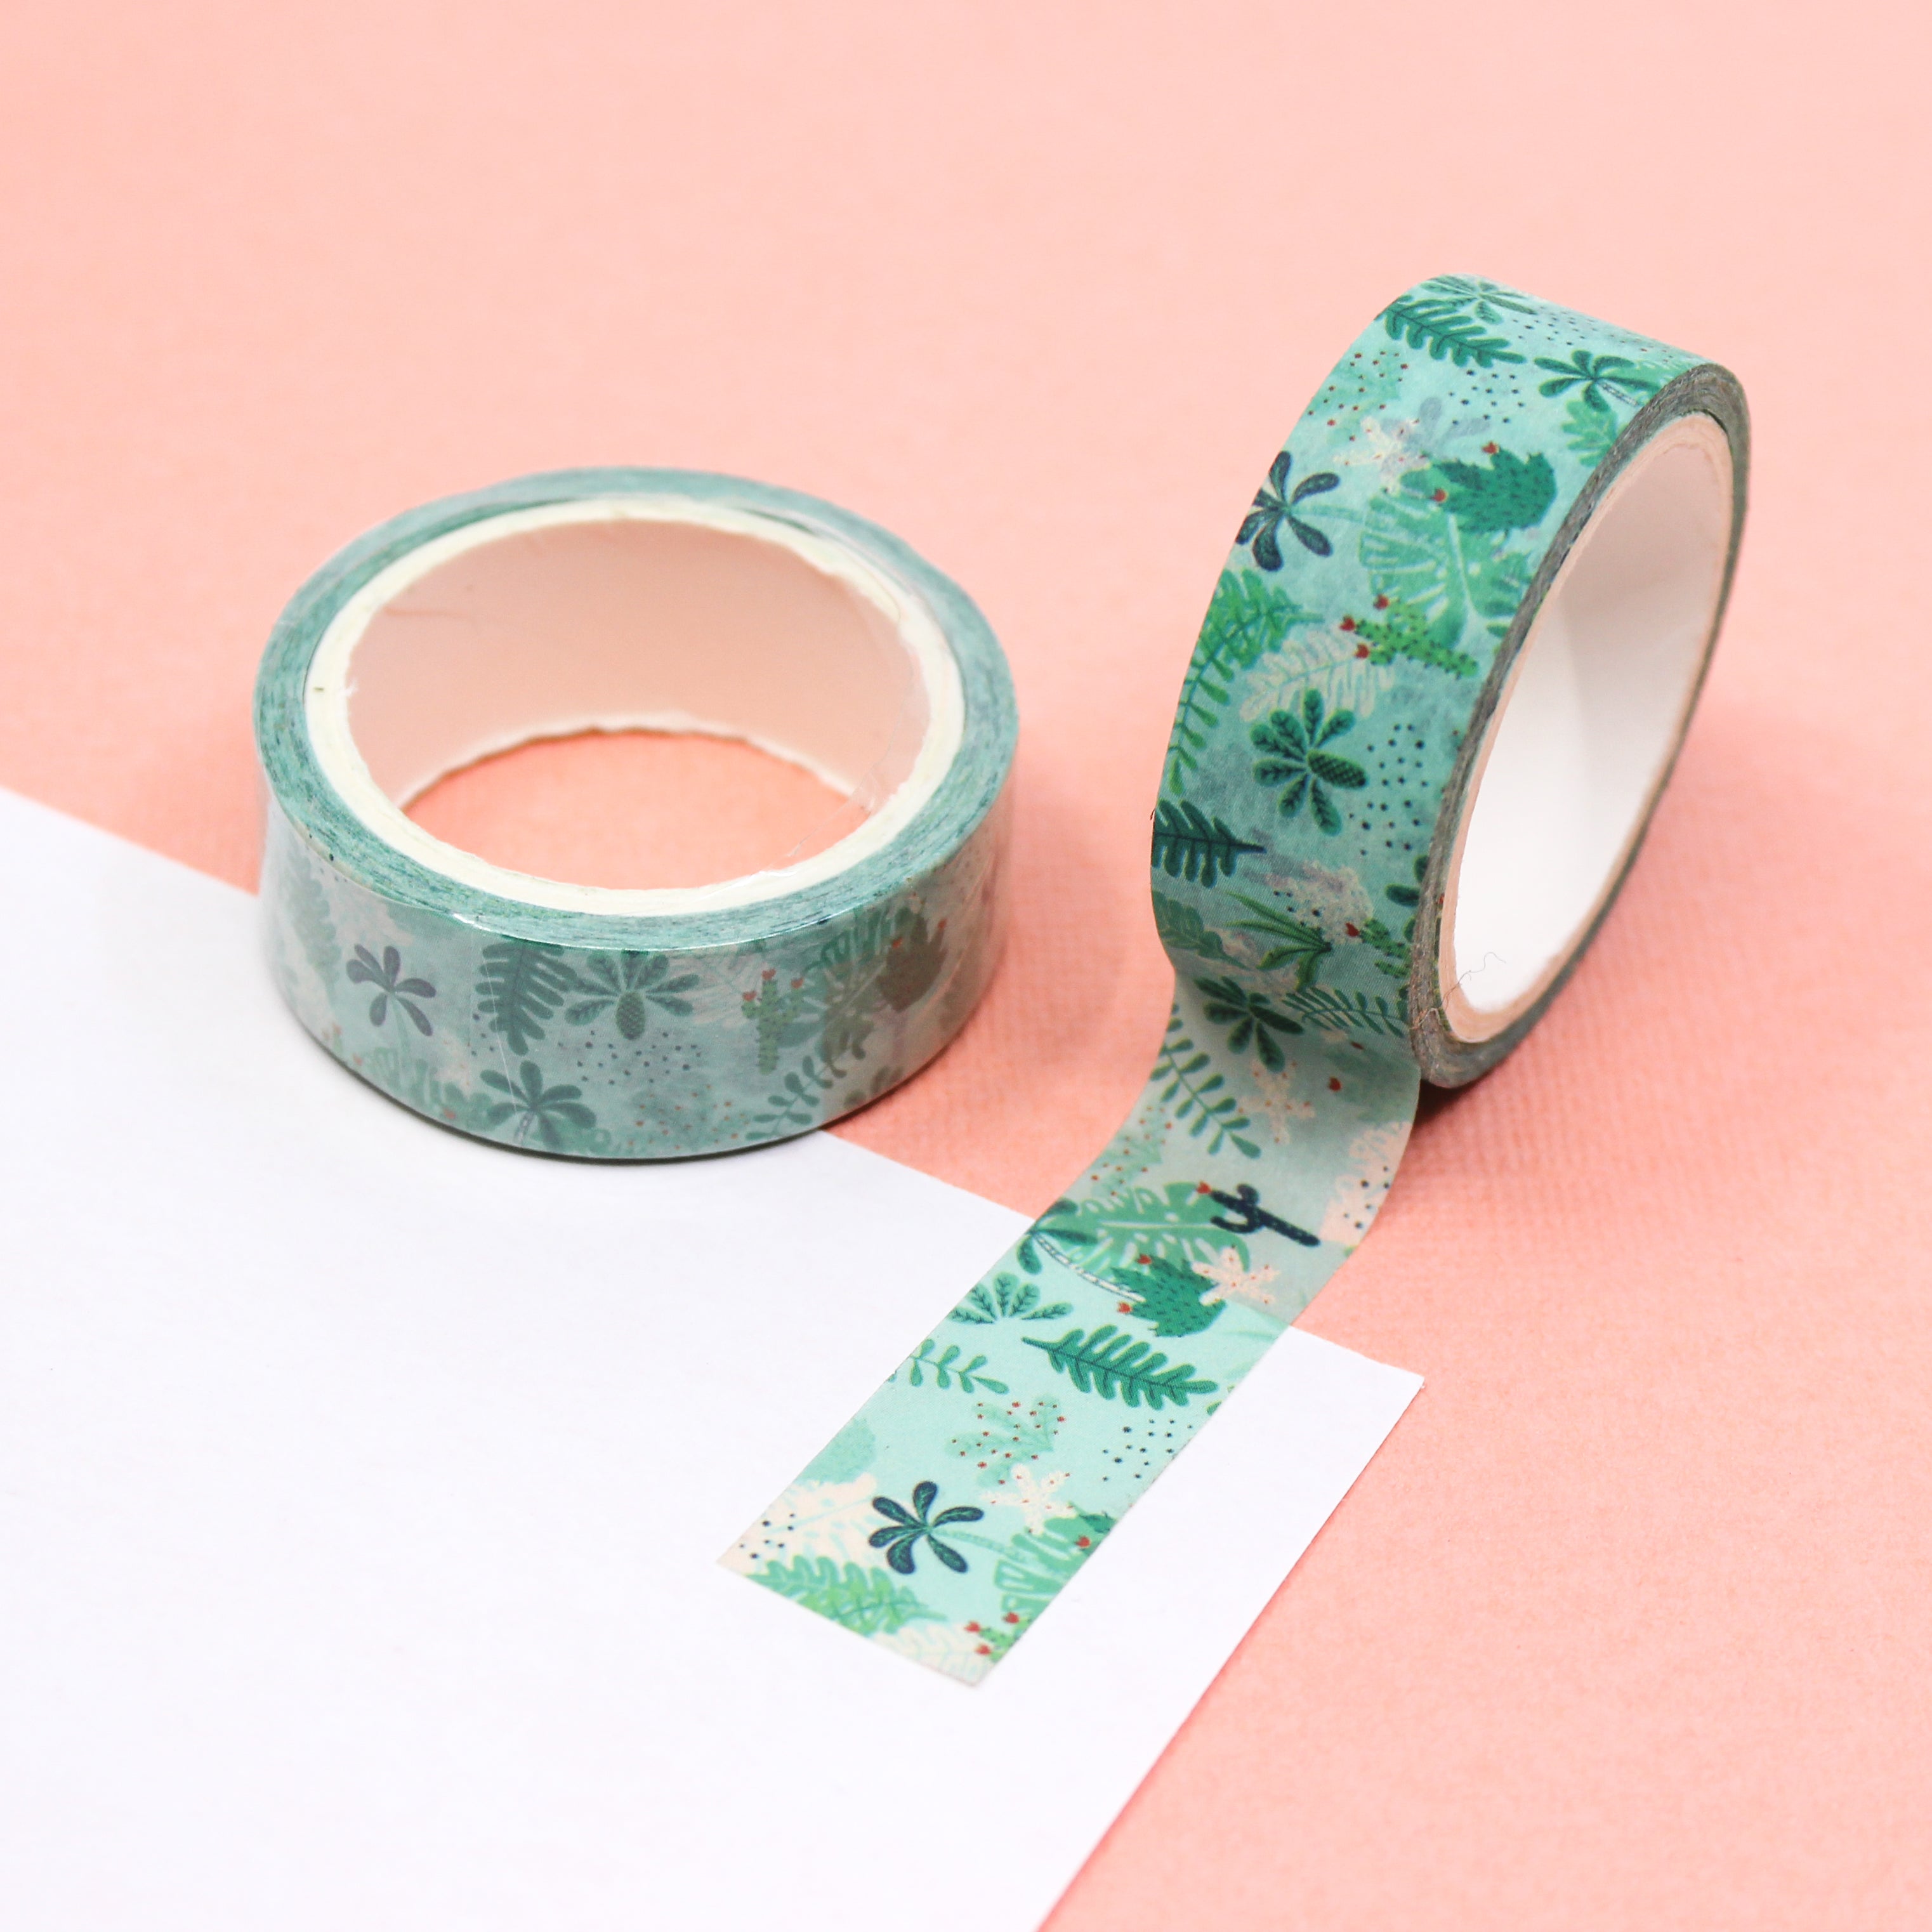 Brighten your crafts with our Colorful Cactus & Succulent Leaves Washi Tape, featuring a playful array of cacti and succulent illustrations. Ideal for adding a lively and botanical touch to your projects. This tape is sold at BBB Supplies Craft Shop.